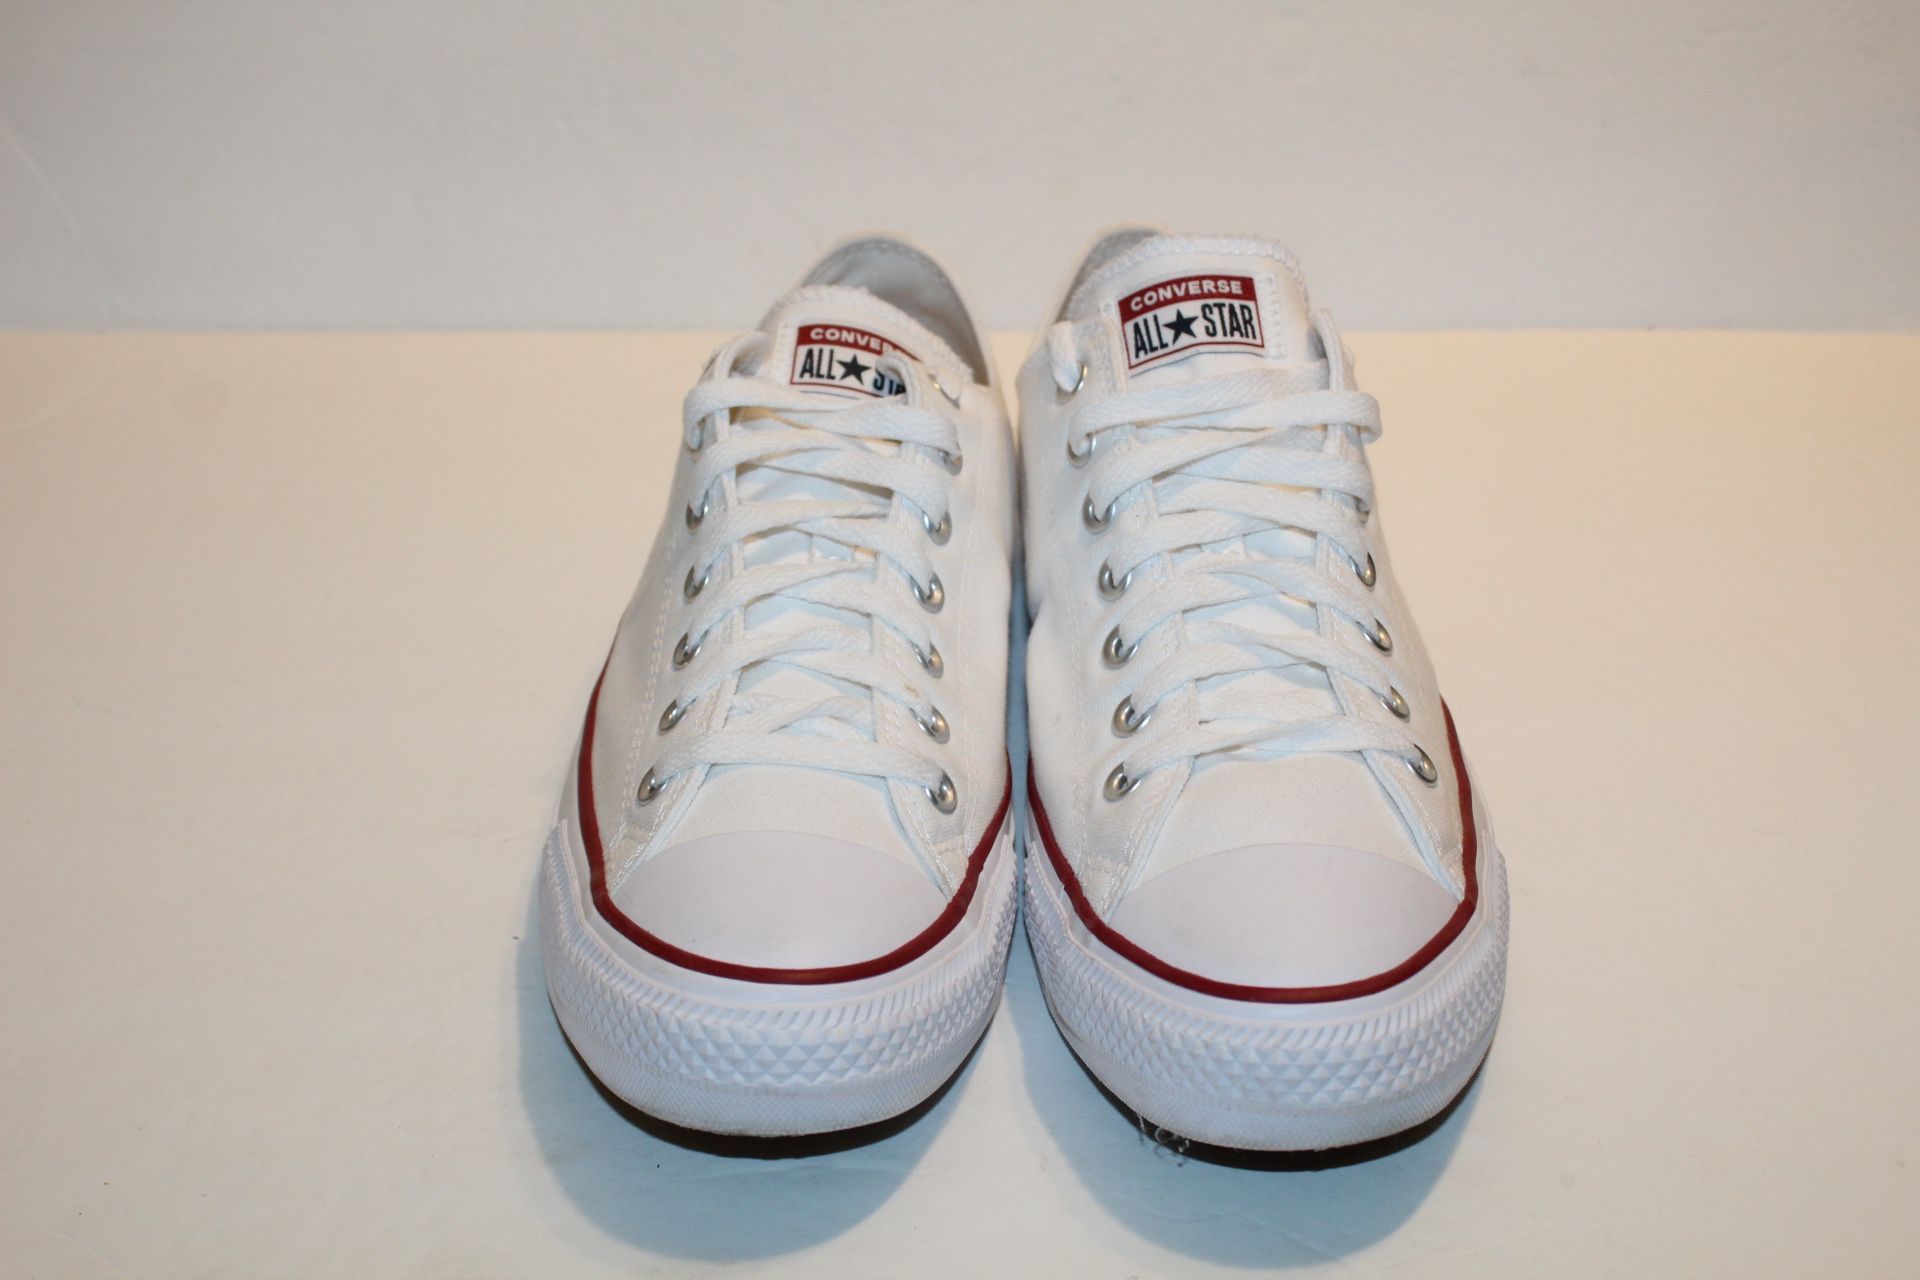 Mens Converse Chuck Taylor All Star Low Shoes Size 11.5 